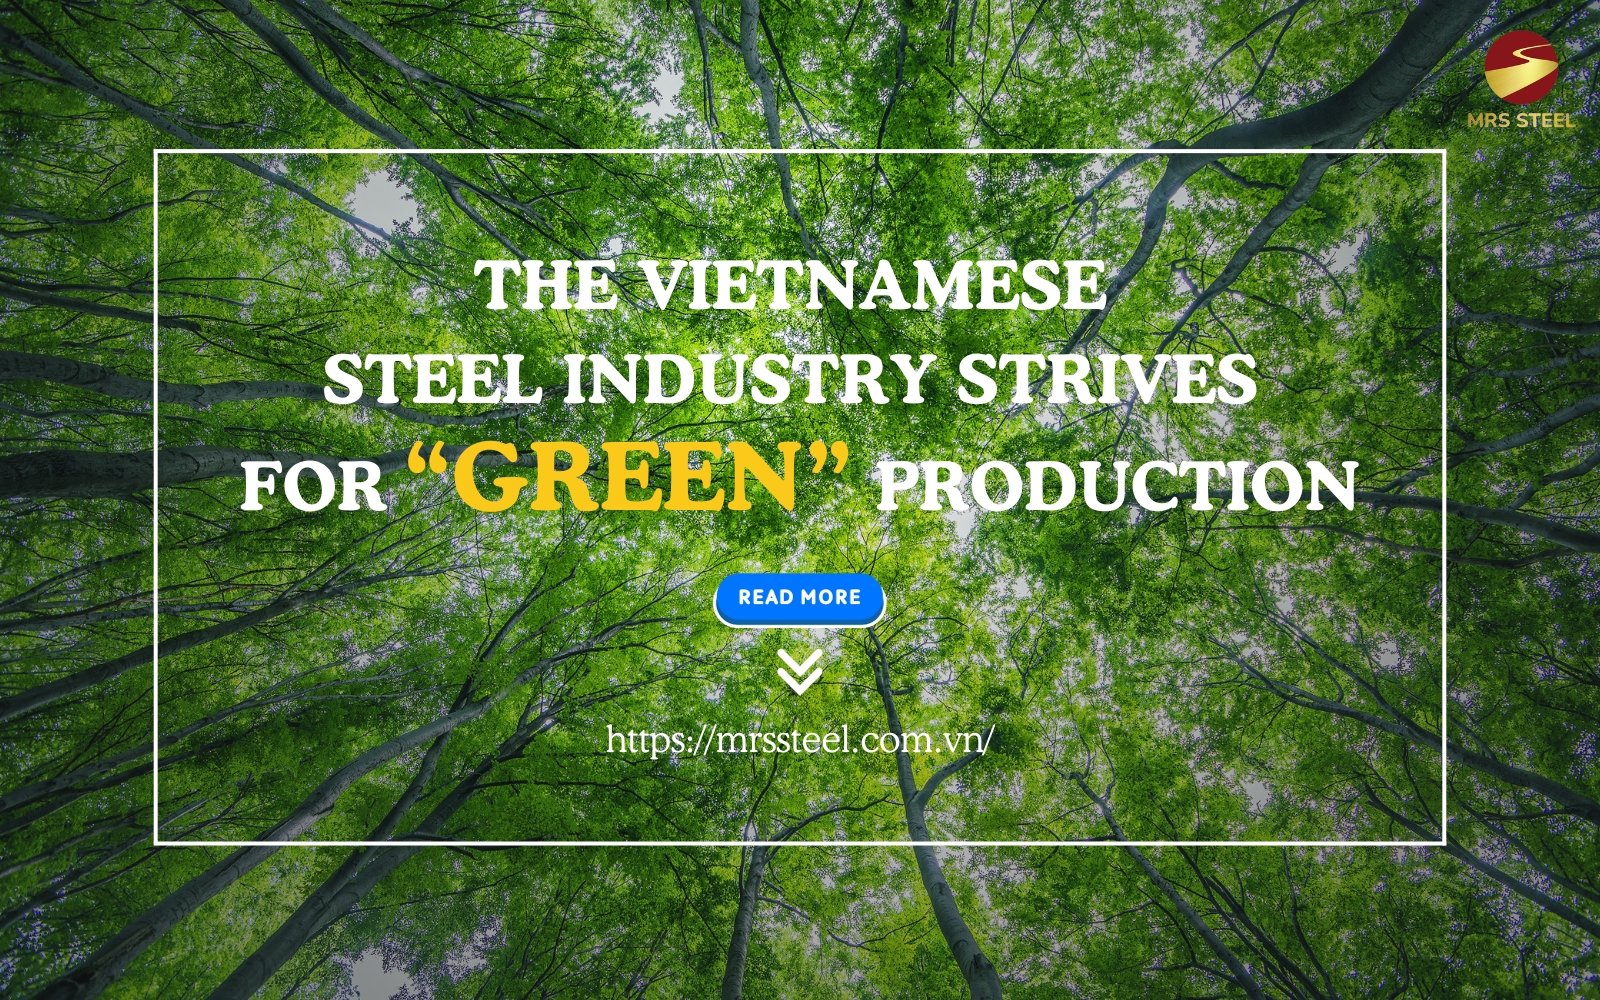 The Vietnamese Steel Industry Strives for “Green” Production